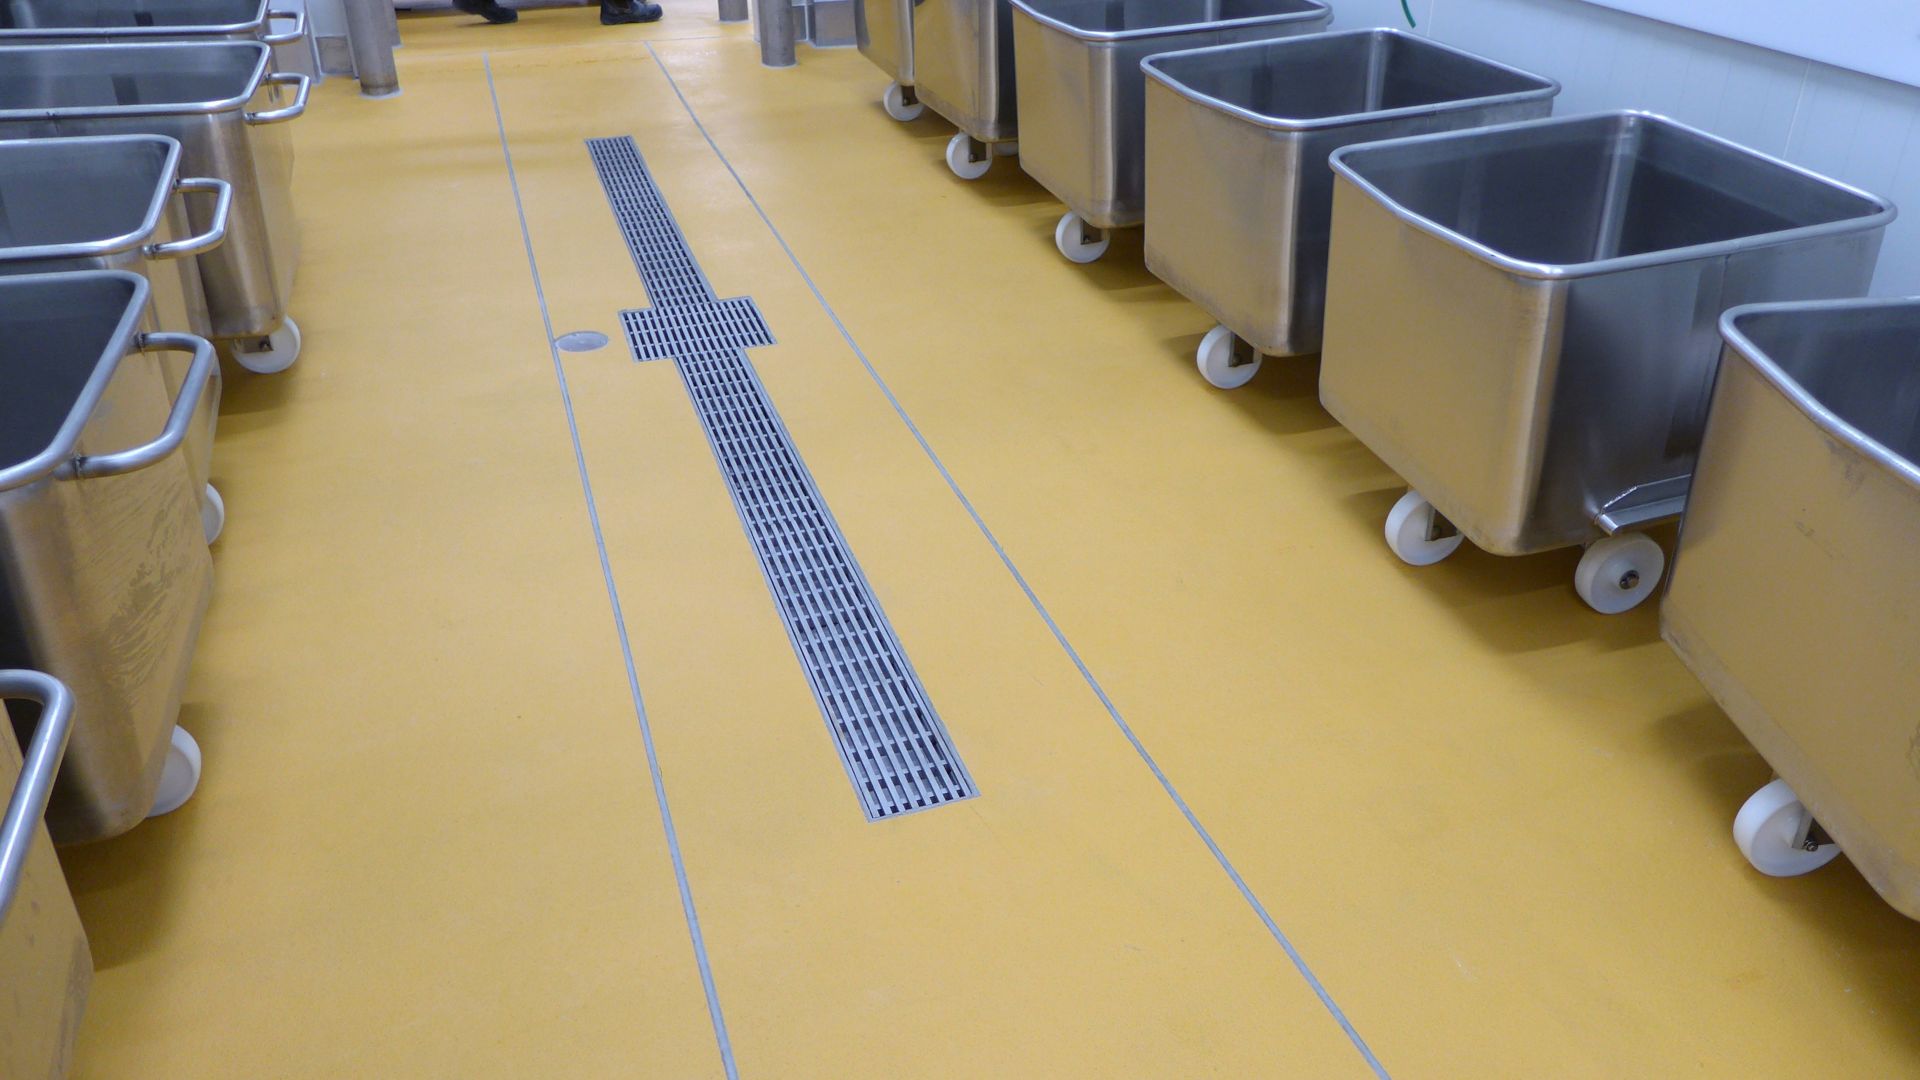 Channels and drains used in industrial flooring